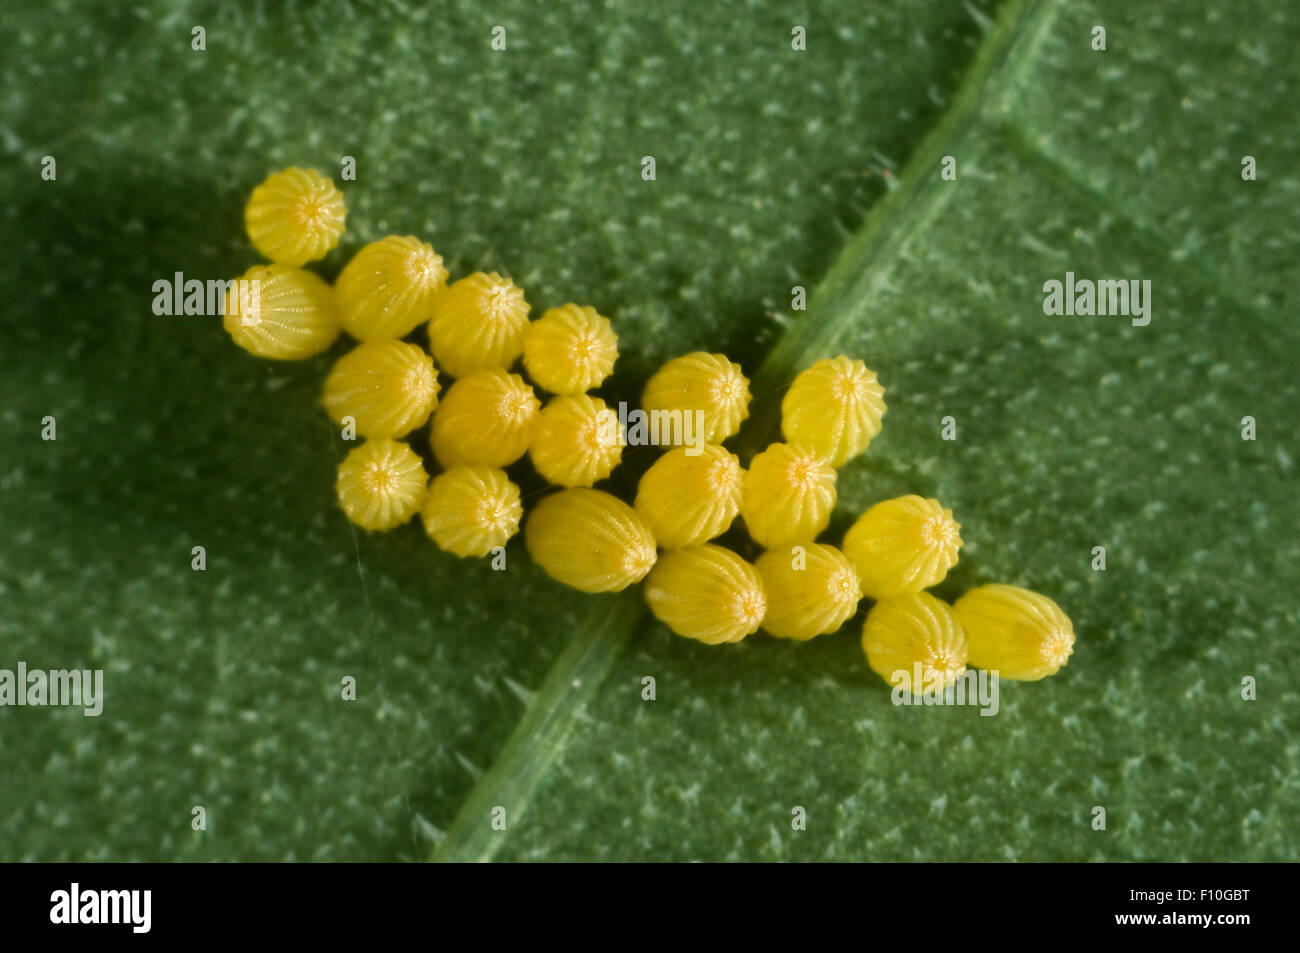 Large or cabbage white butterfly, Pieris brassicae, eggs laid on the underside leaf surface of a nasturtium, Tropaeolum majus, l Stock Photo